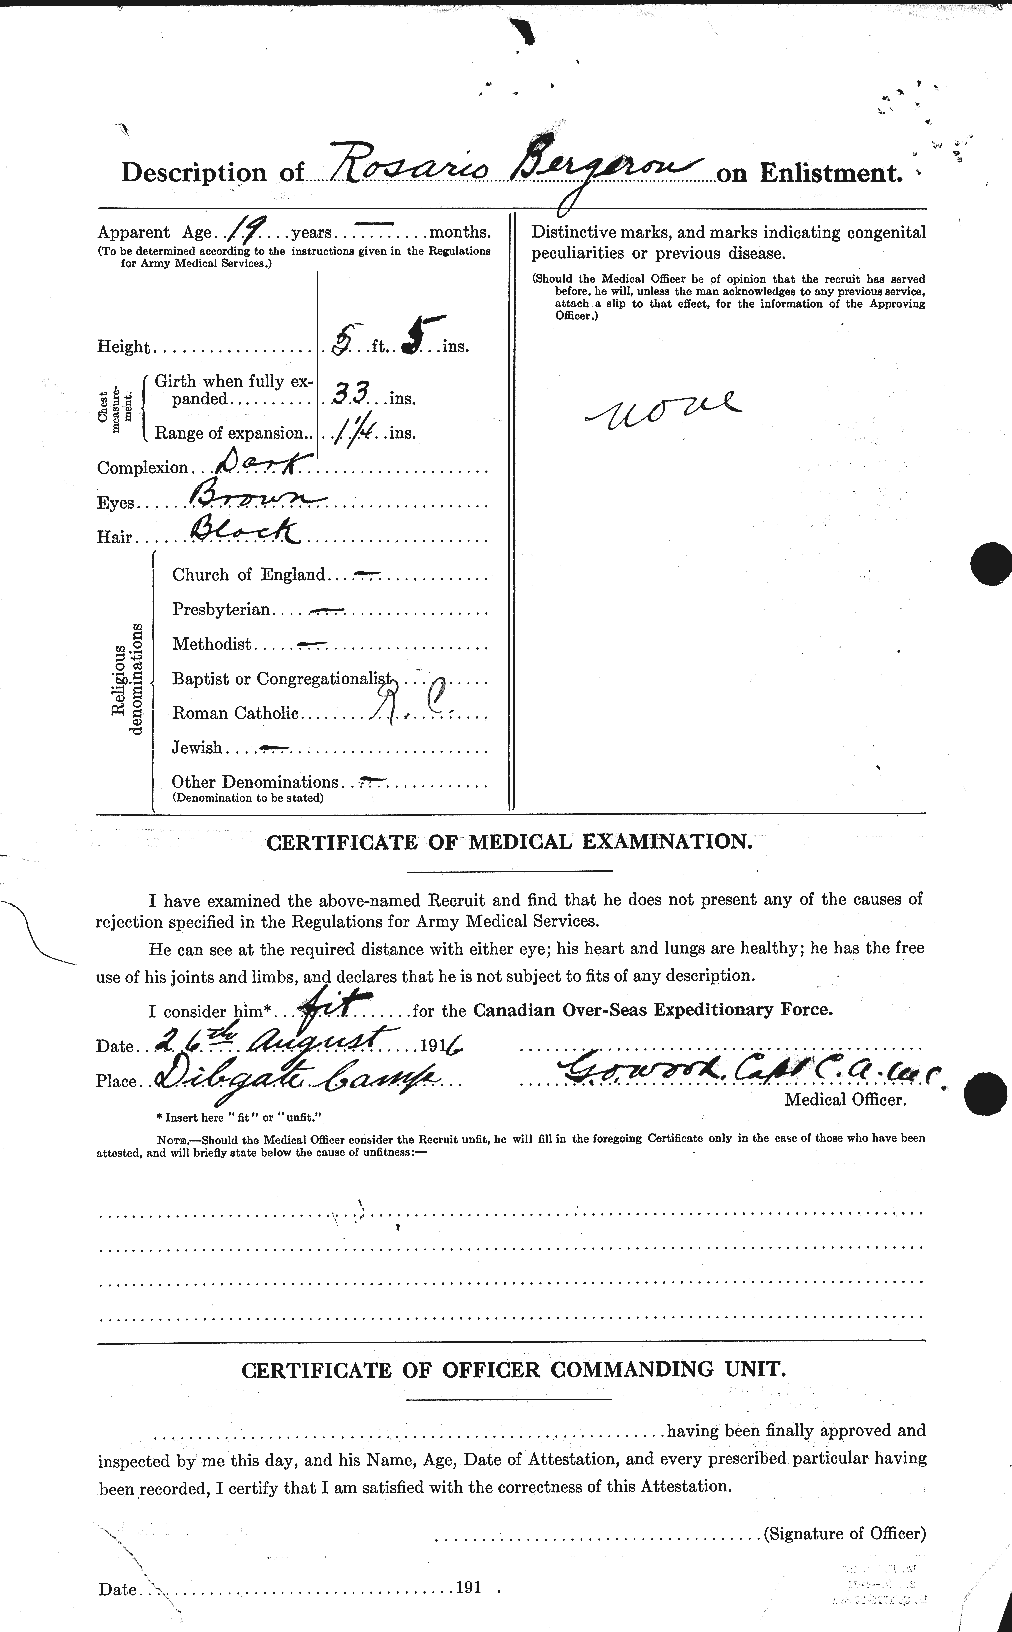 Personnel Records of the First World War - CEF 232932b